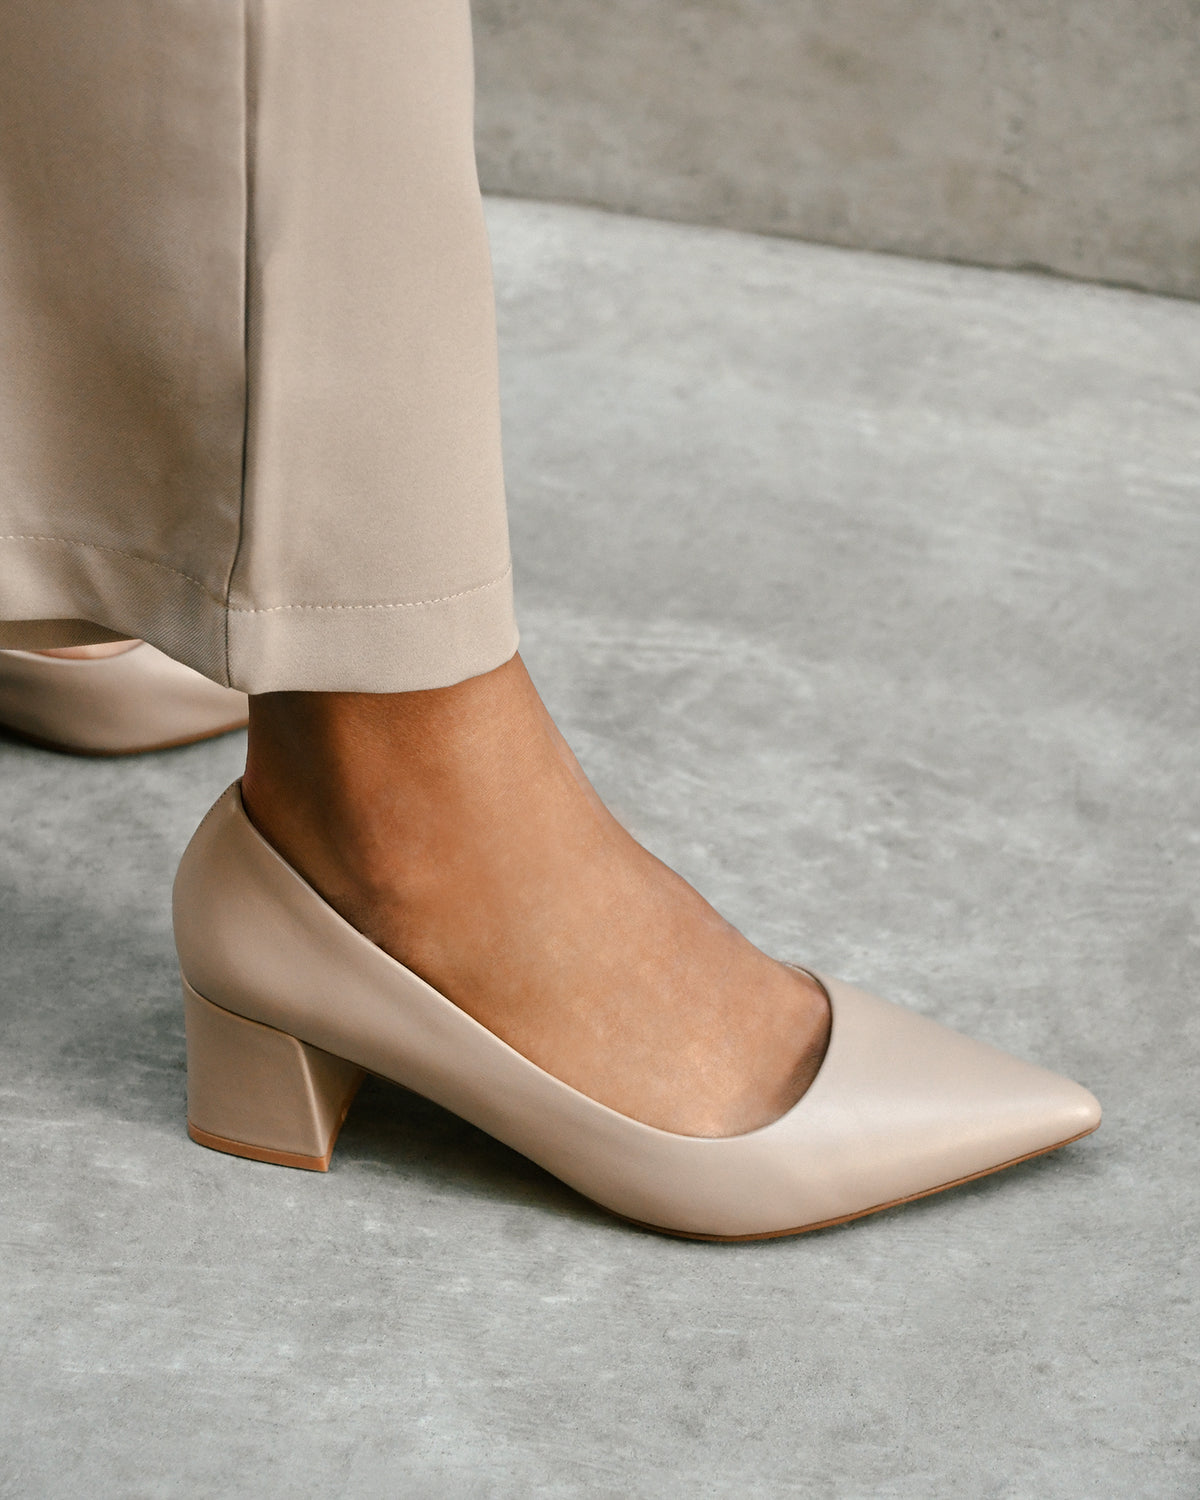 CARRINGTON LOW HEELS TAUPE LEATHER